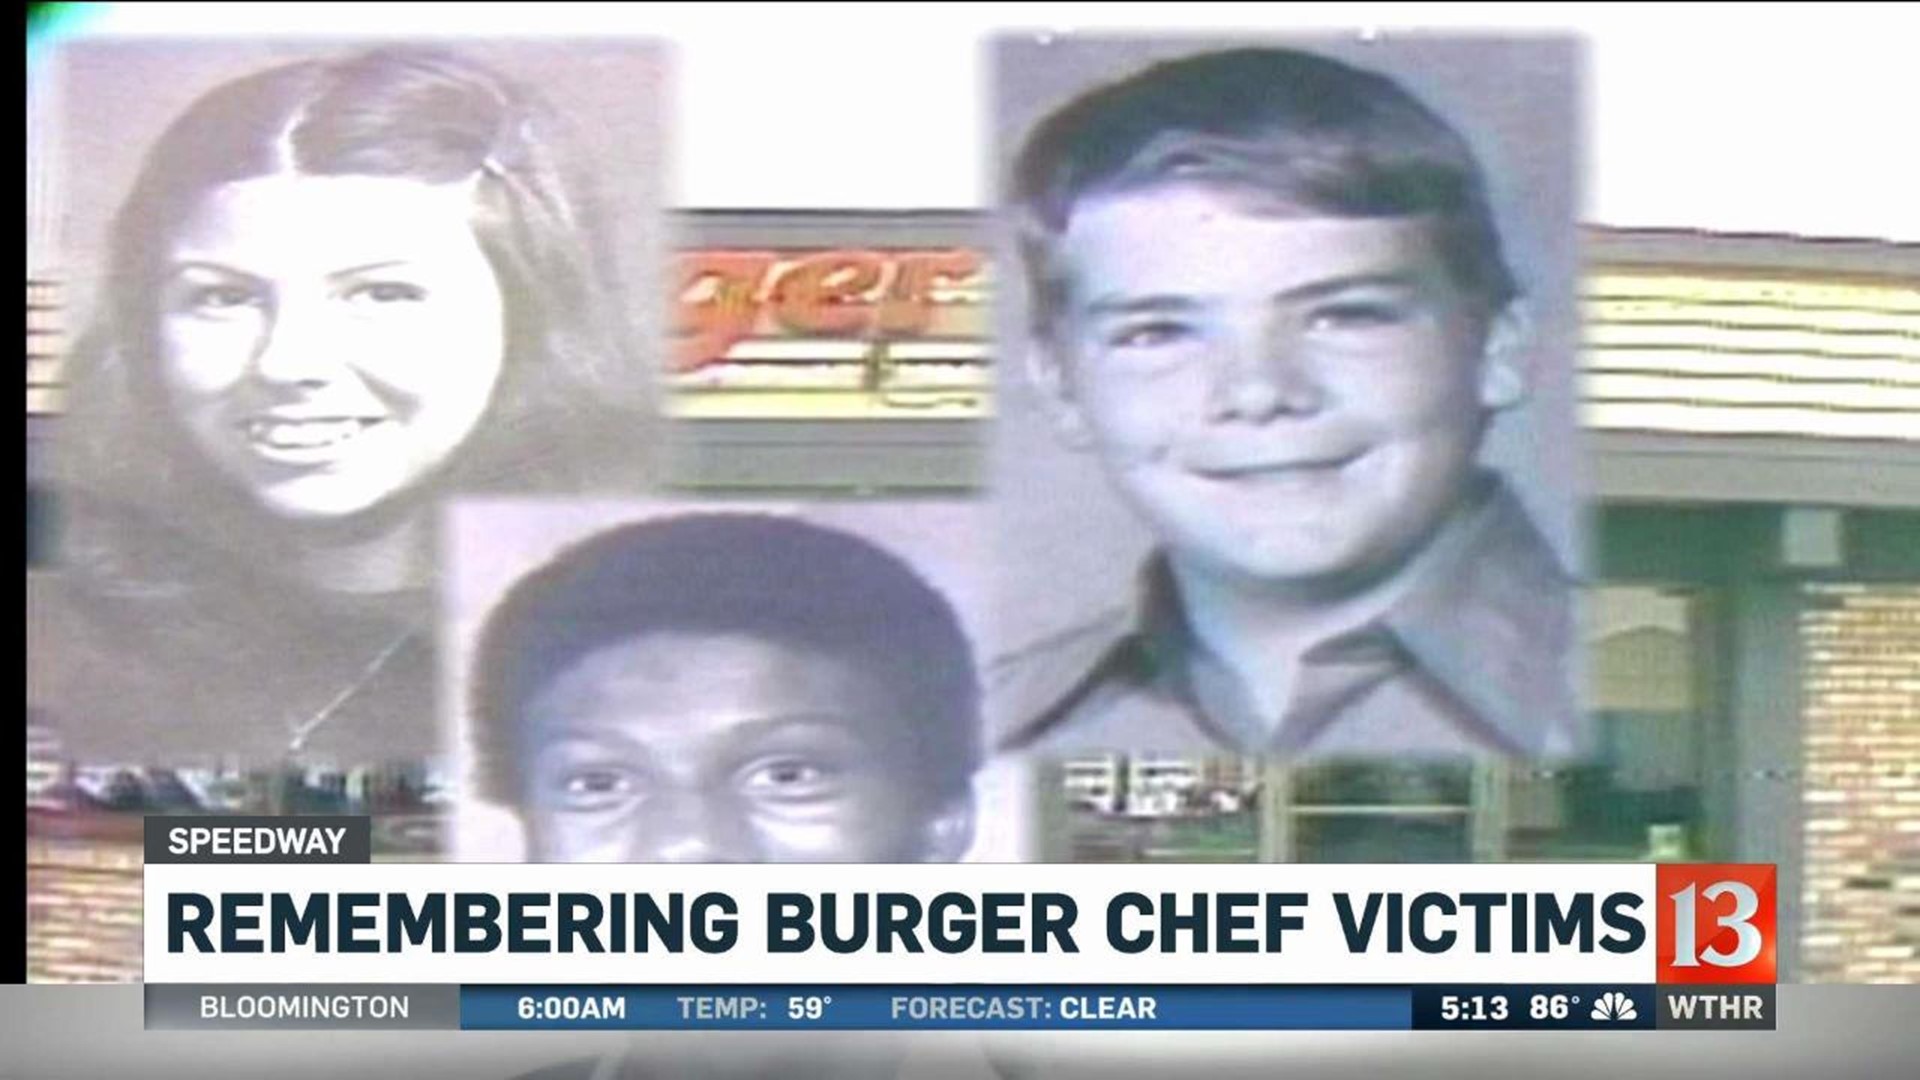 Remembering Burger Chef murder victims